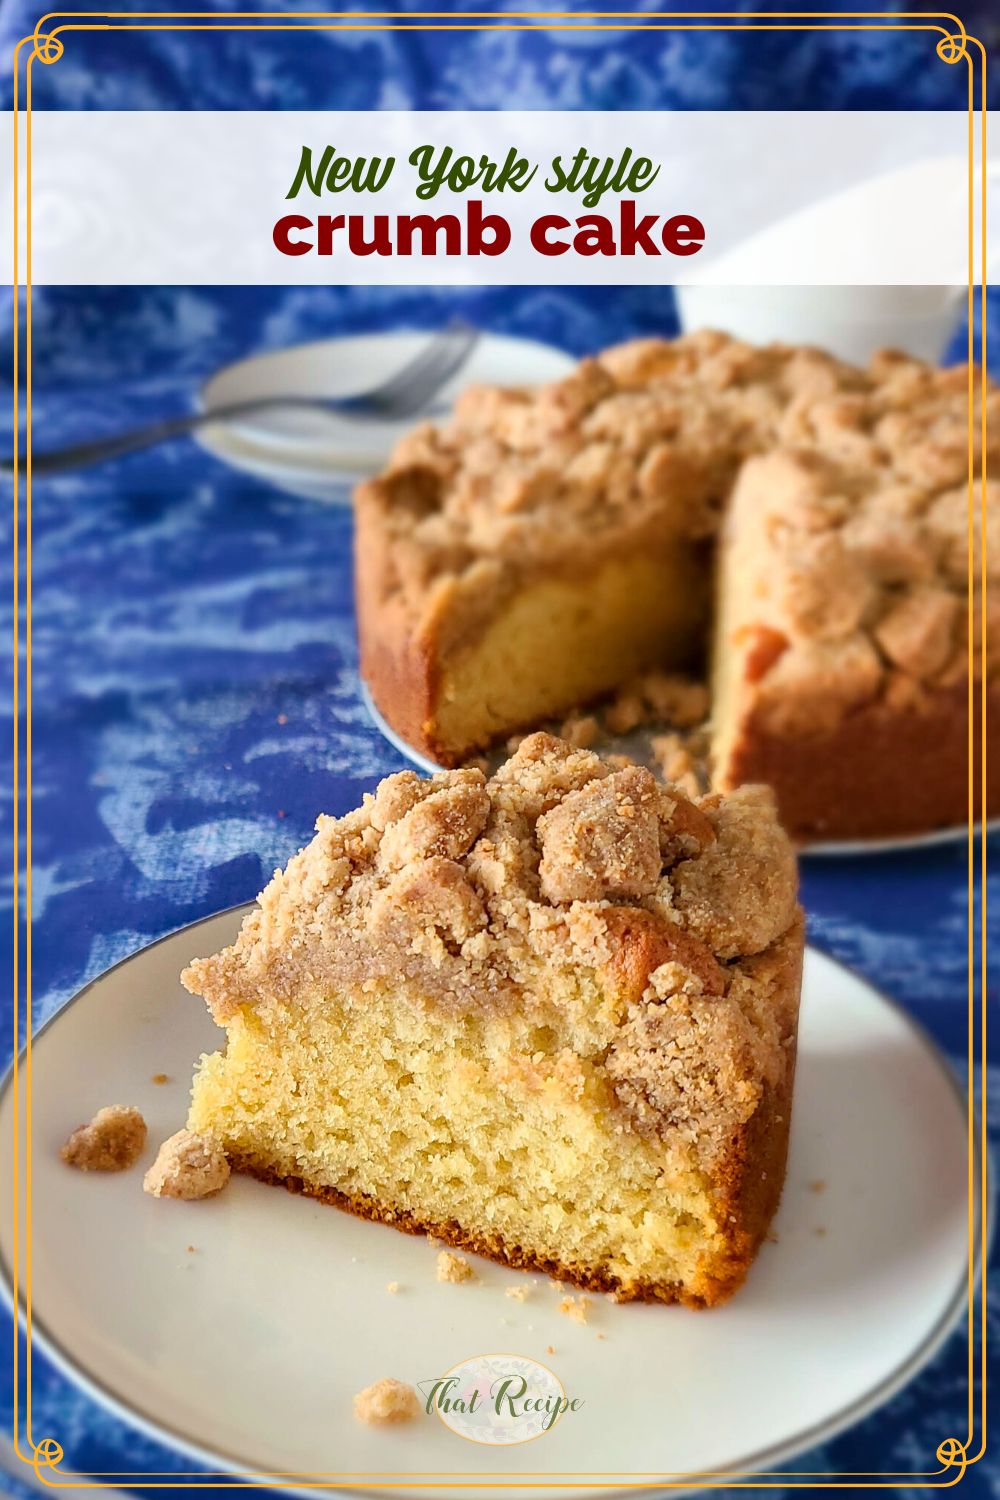 coffee cake on a plate with text overlay "NY style crumb cake"